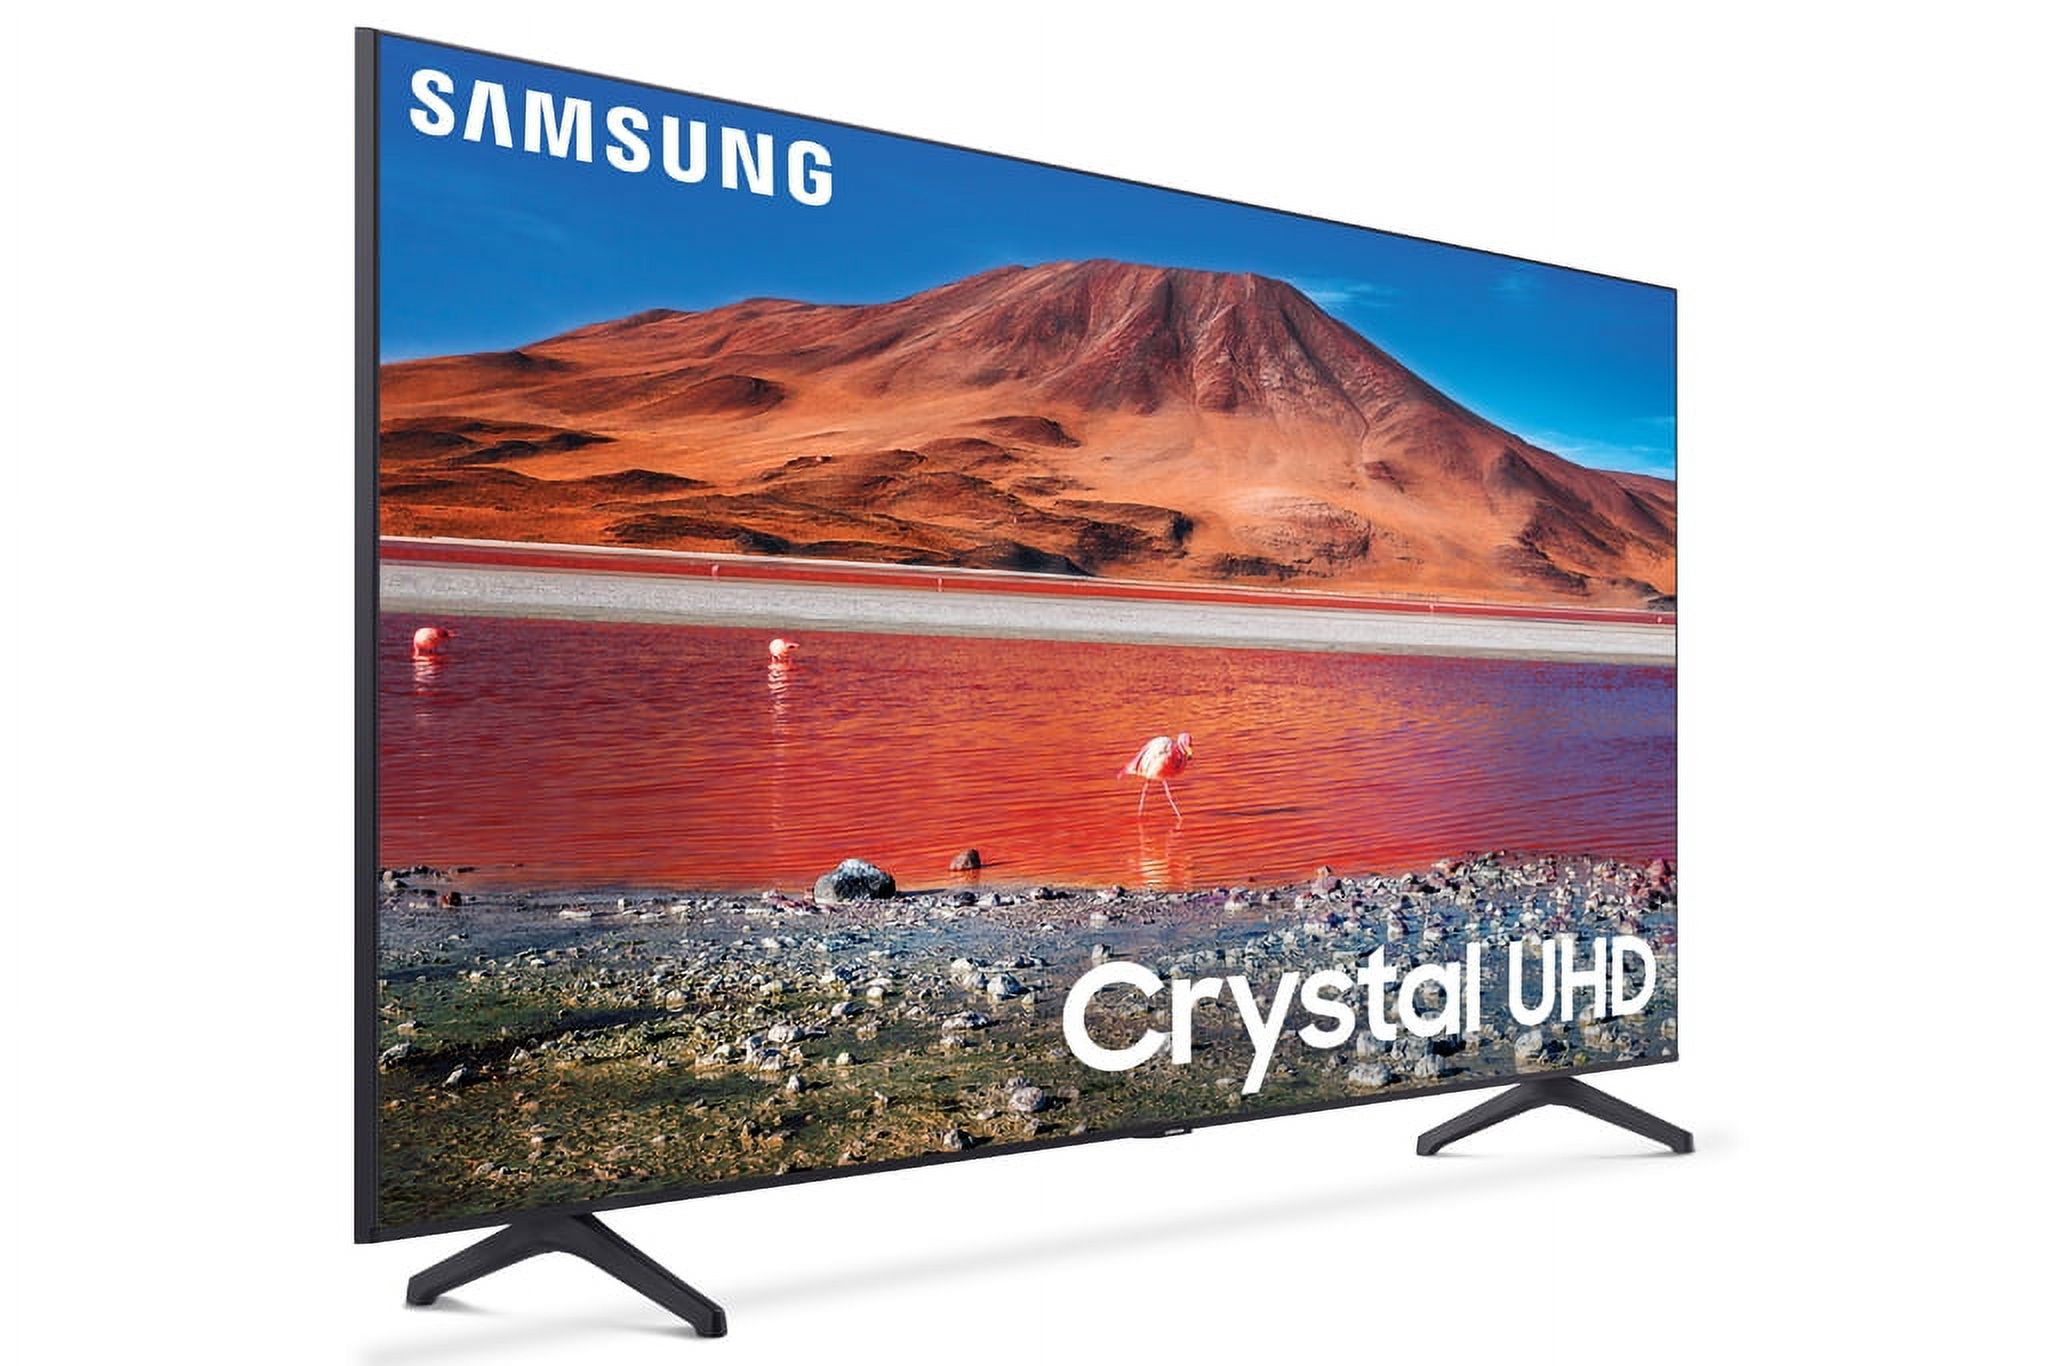 SAMSUNG 43" Class 4K Crystal UHD (2160P) LED Smart TV with HDR UN43TU7000 - image 3 of 11